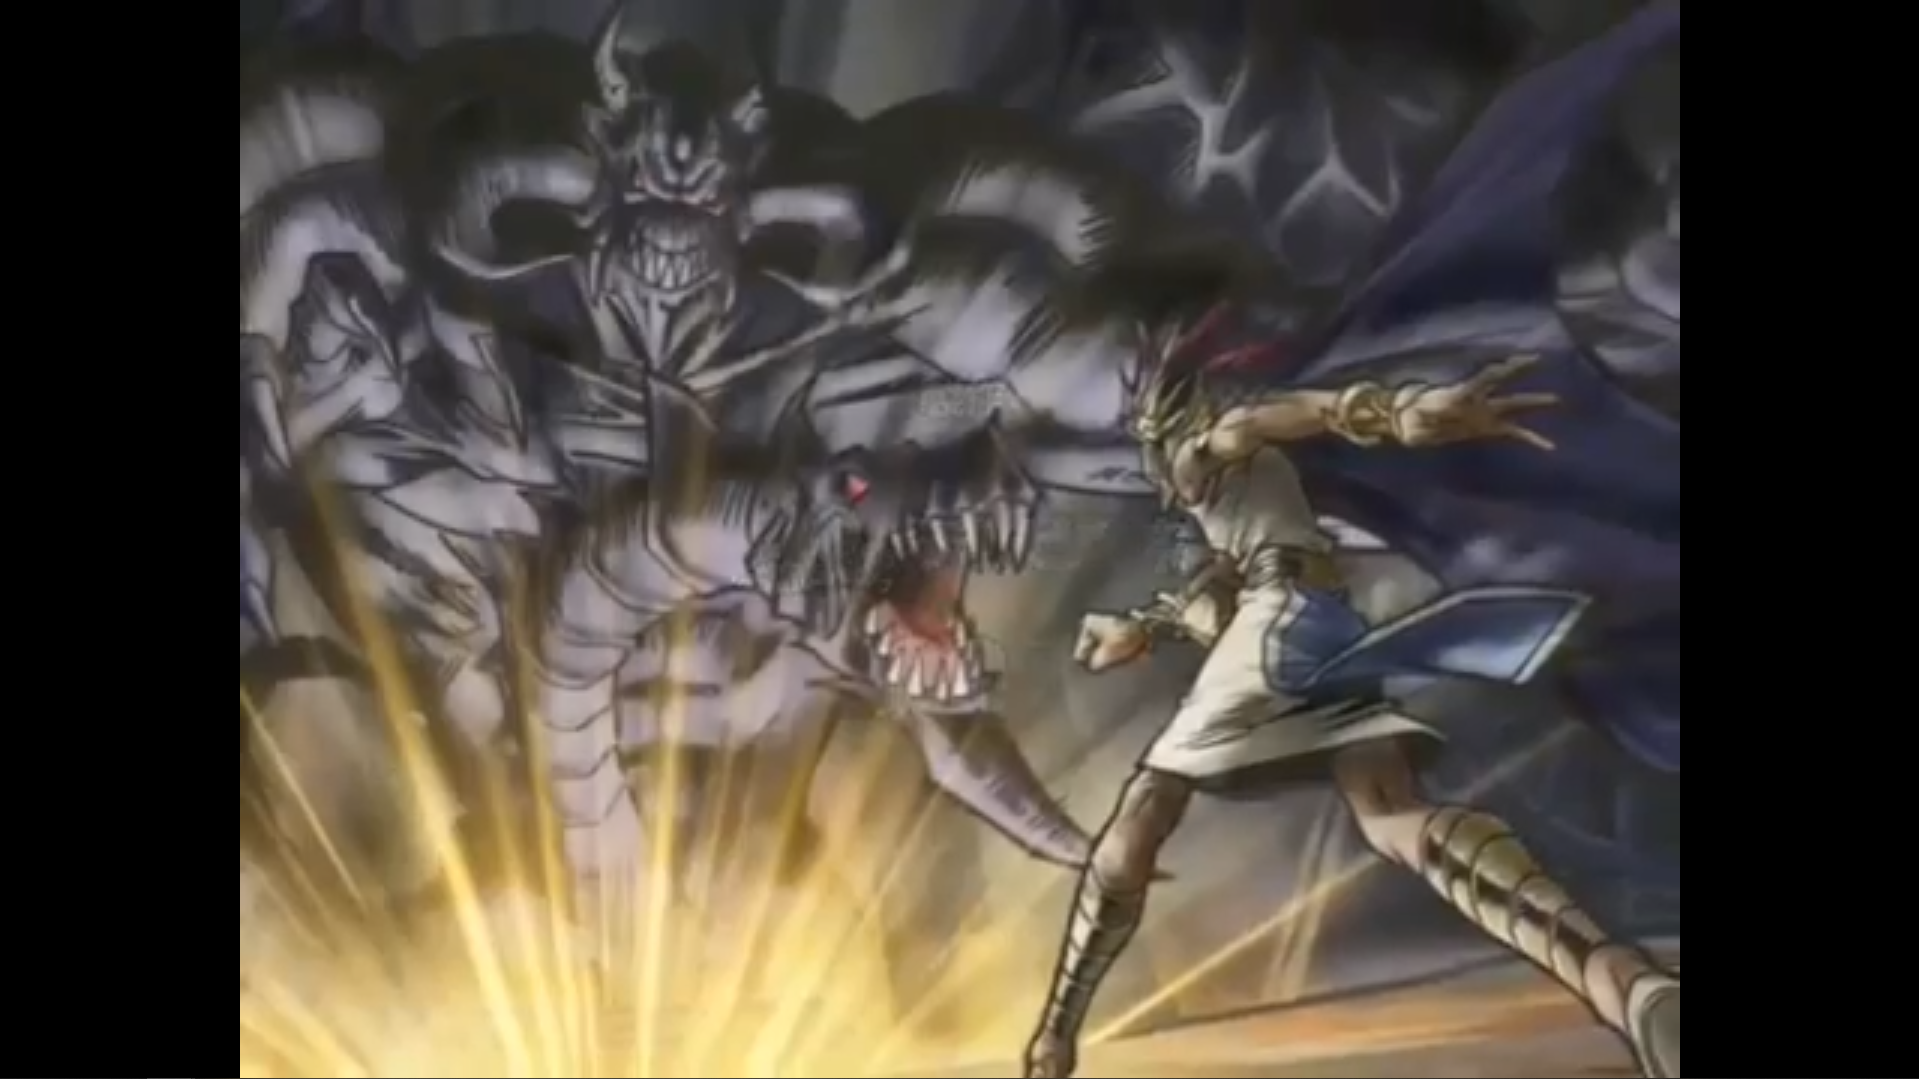 Yami Yuugi goes face to face against powerful ancient monsters.